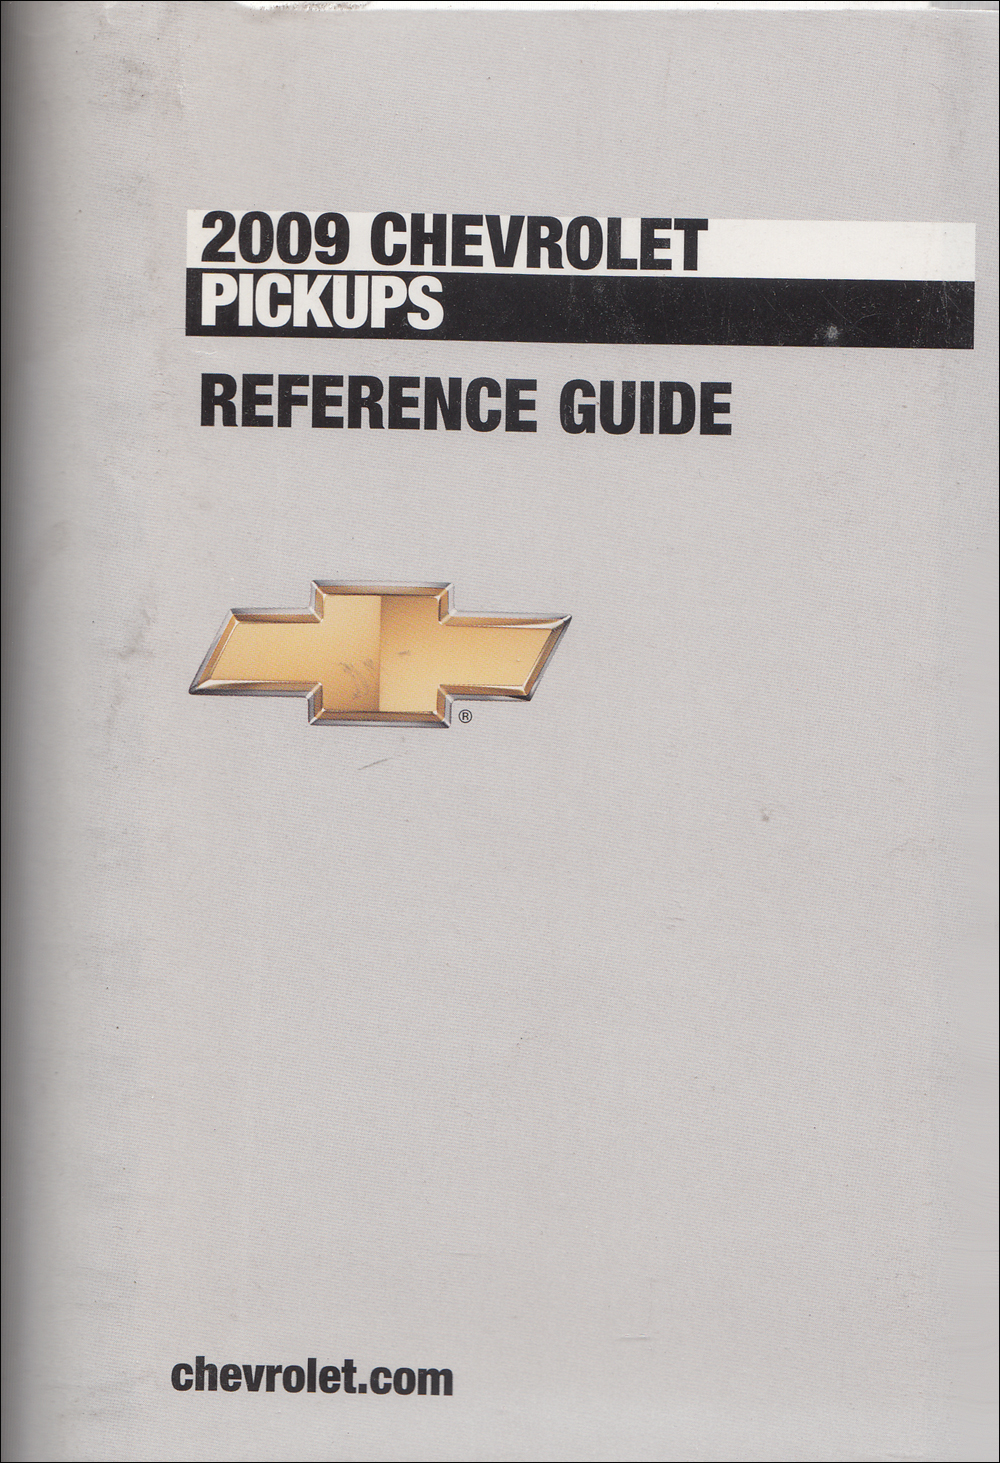 2009 Chevrolet Pickup Data Book with Color & Upholstery Original